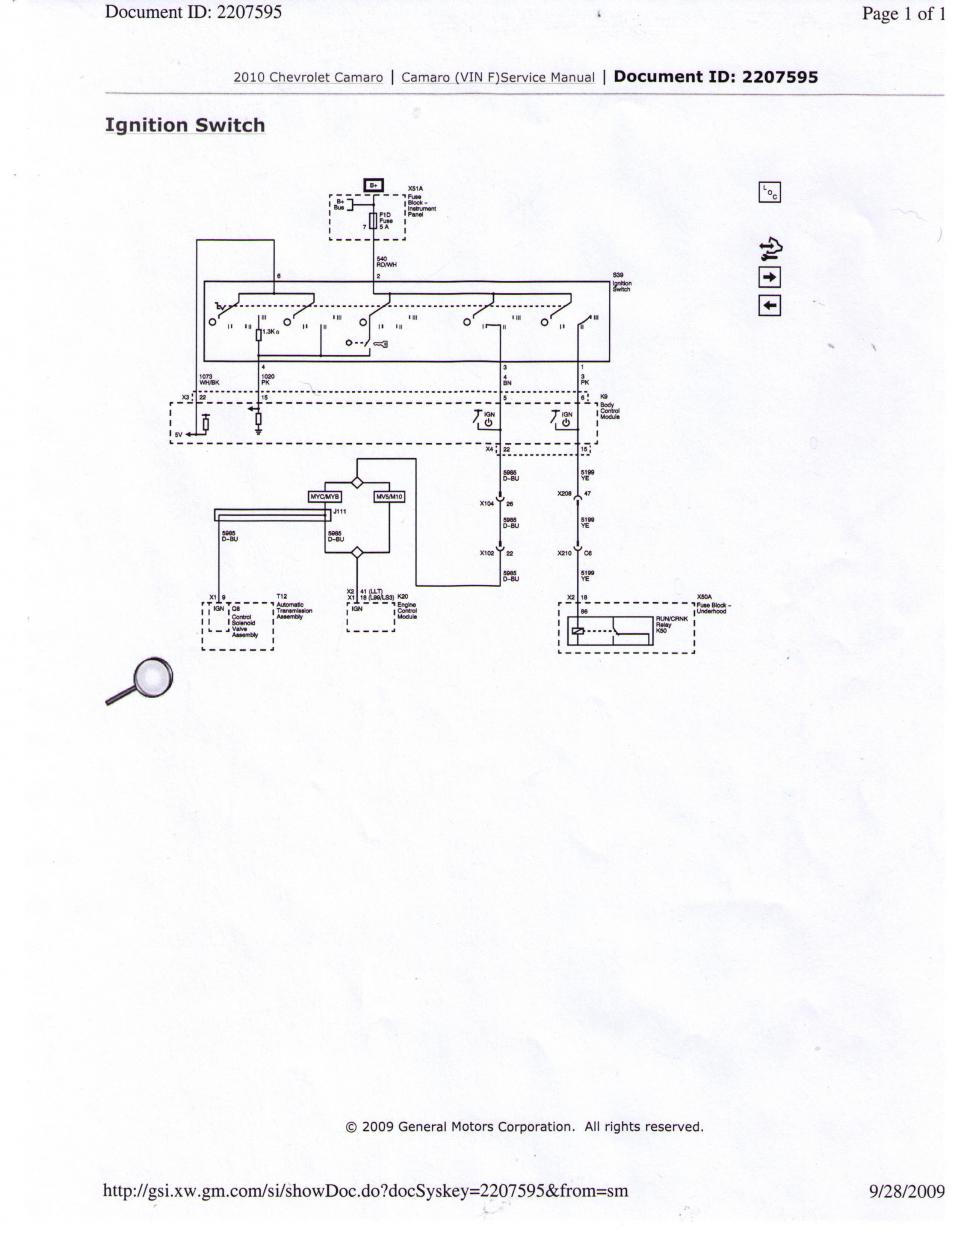 We Need Help With Electronics Wiring Diagrams